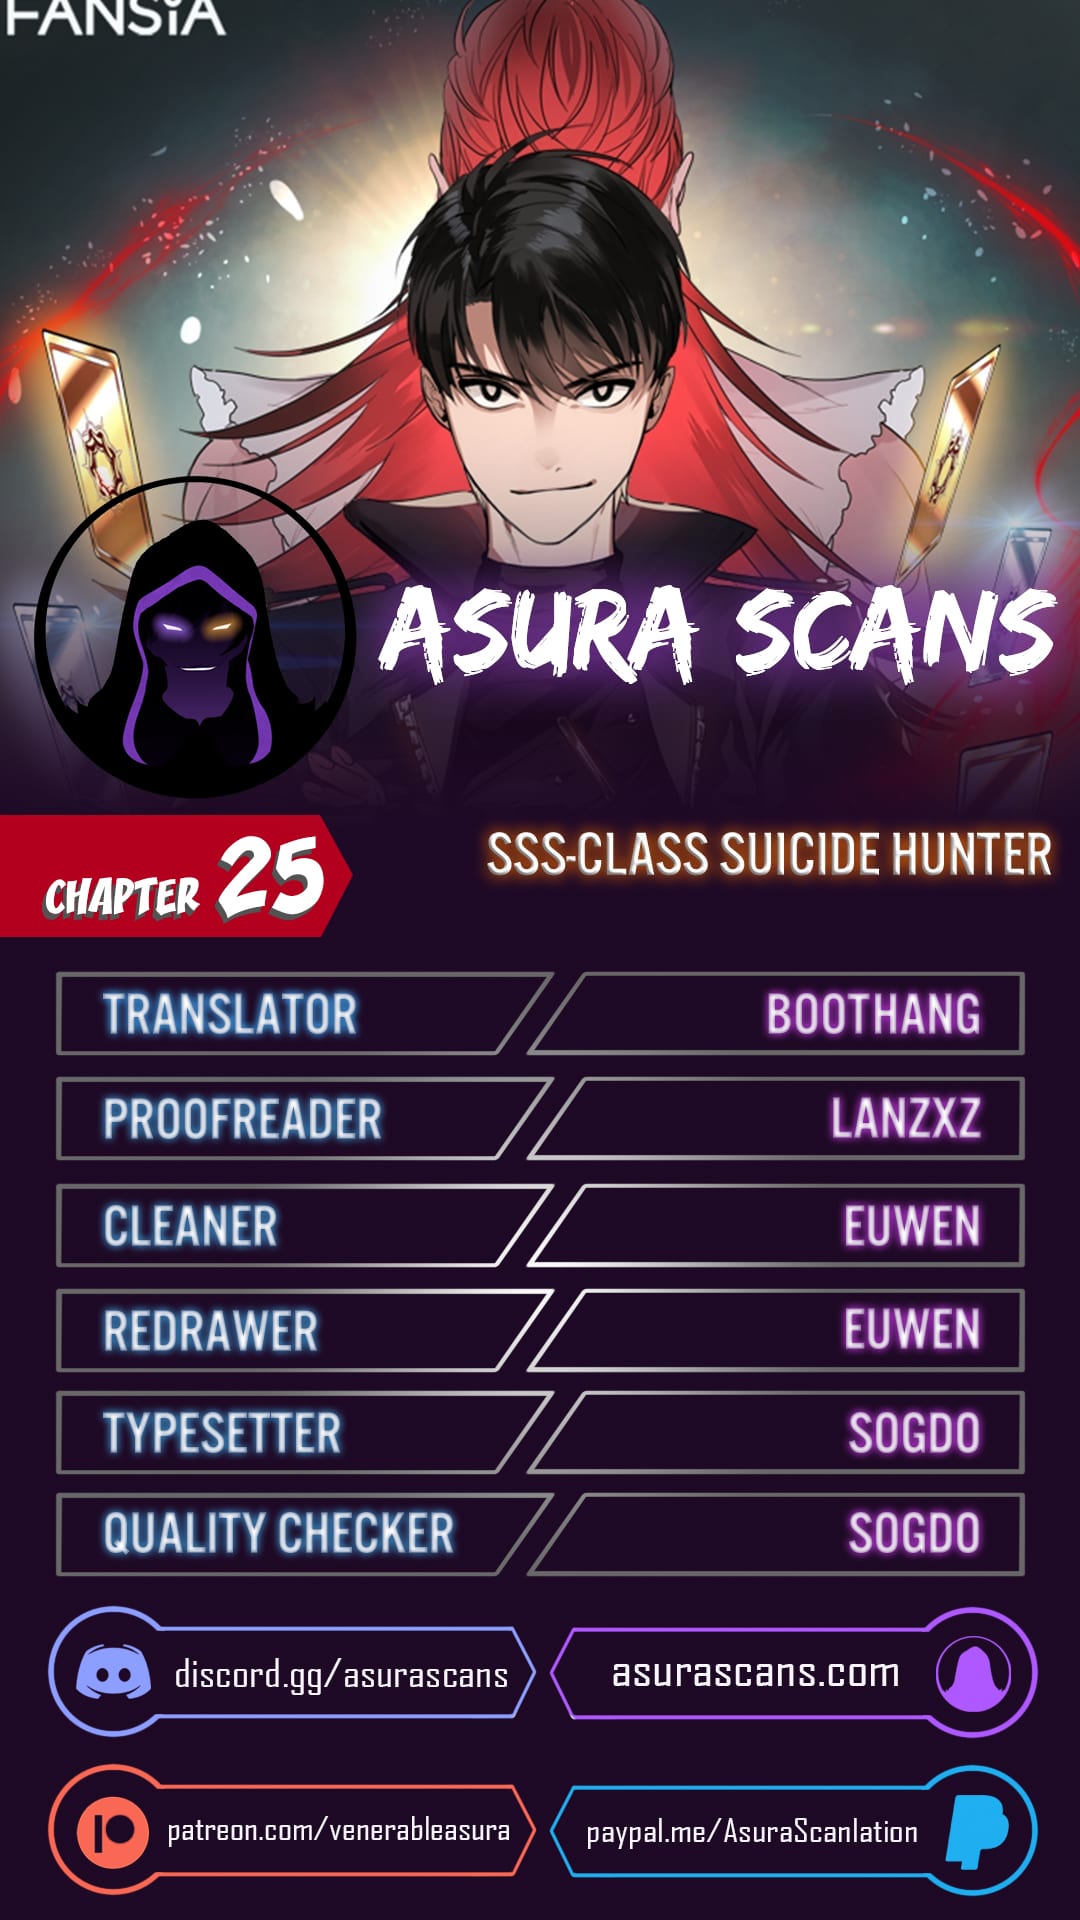 SSS-Class Suicide Hunter chapter 25